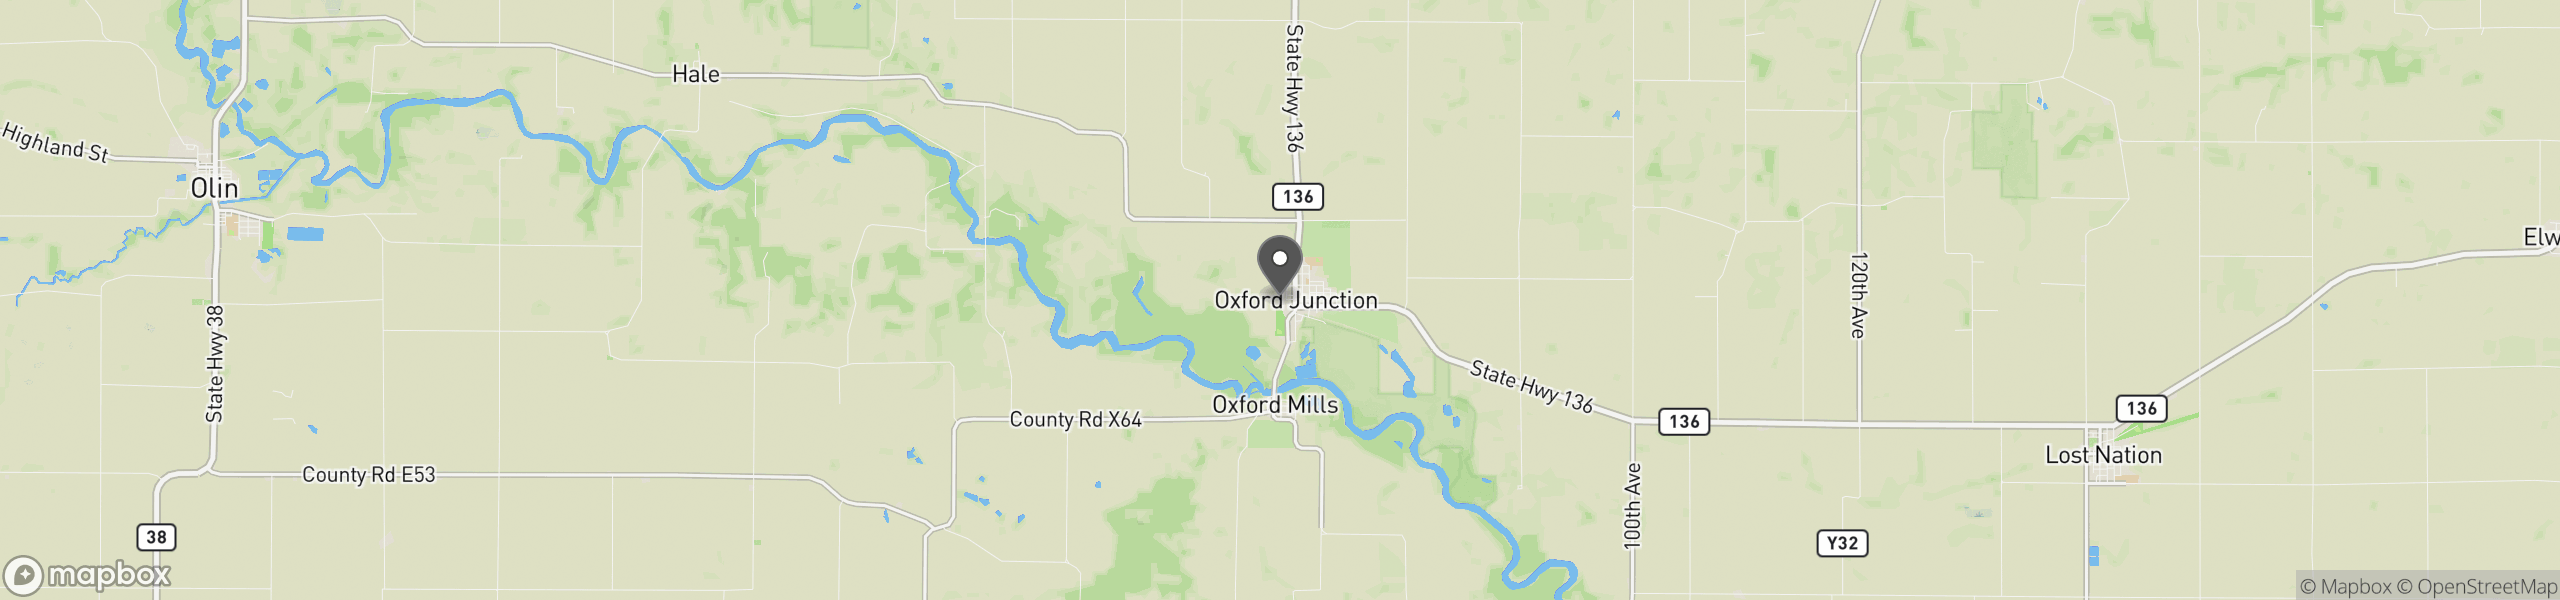 Oxford Junction, IA 52323